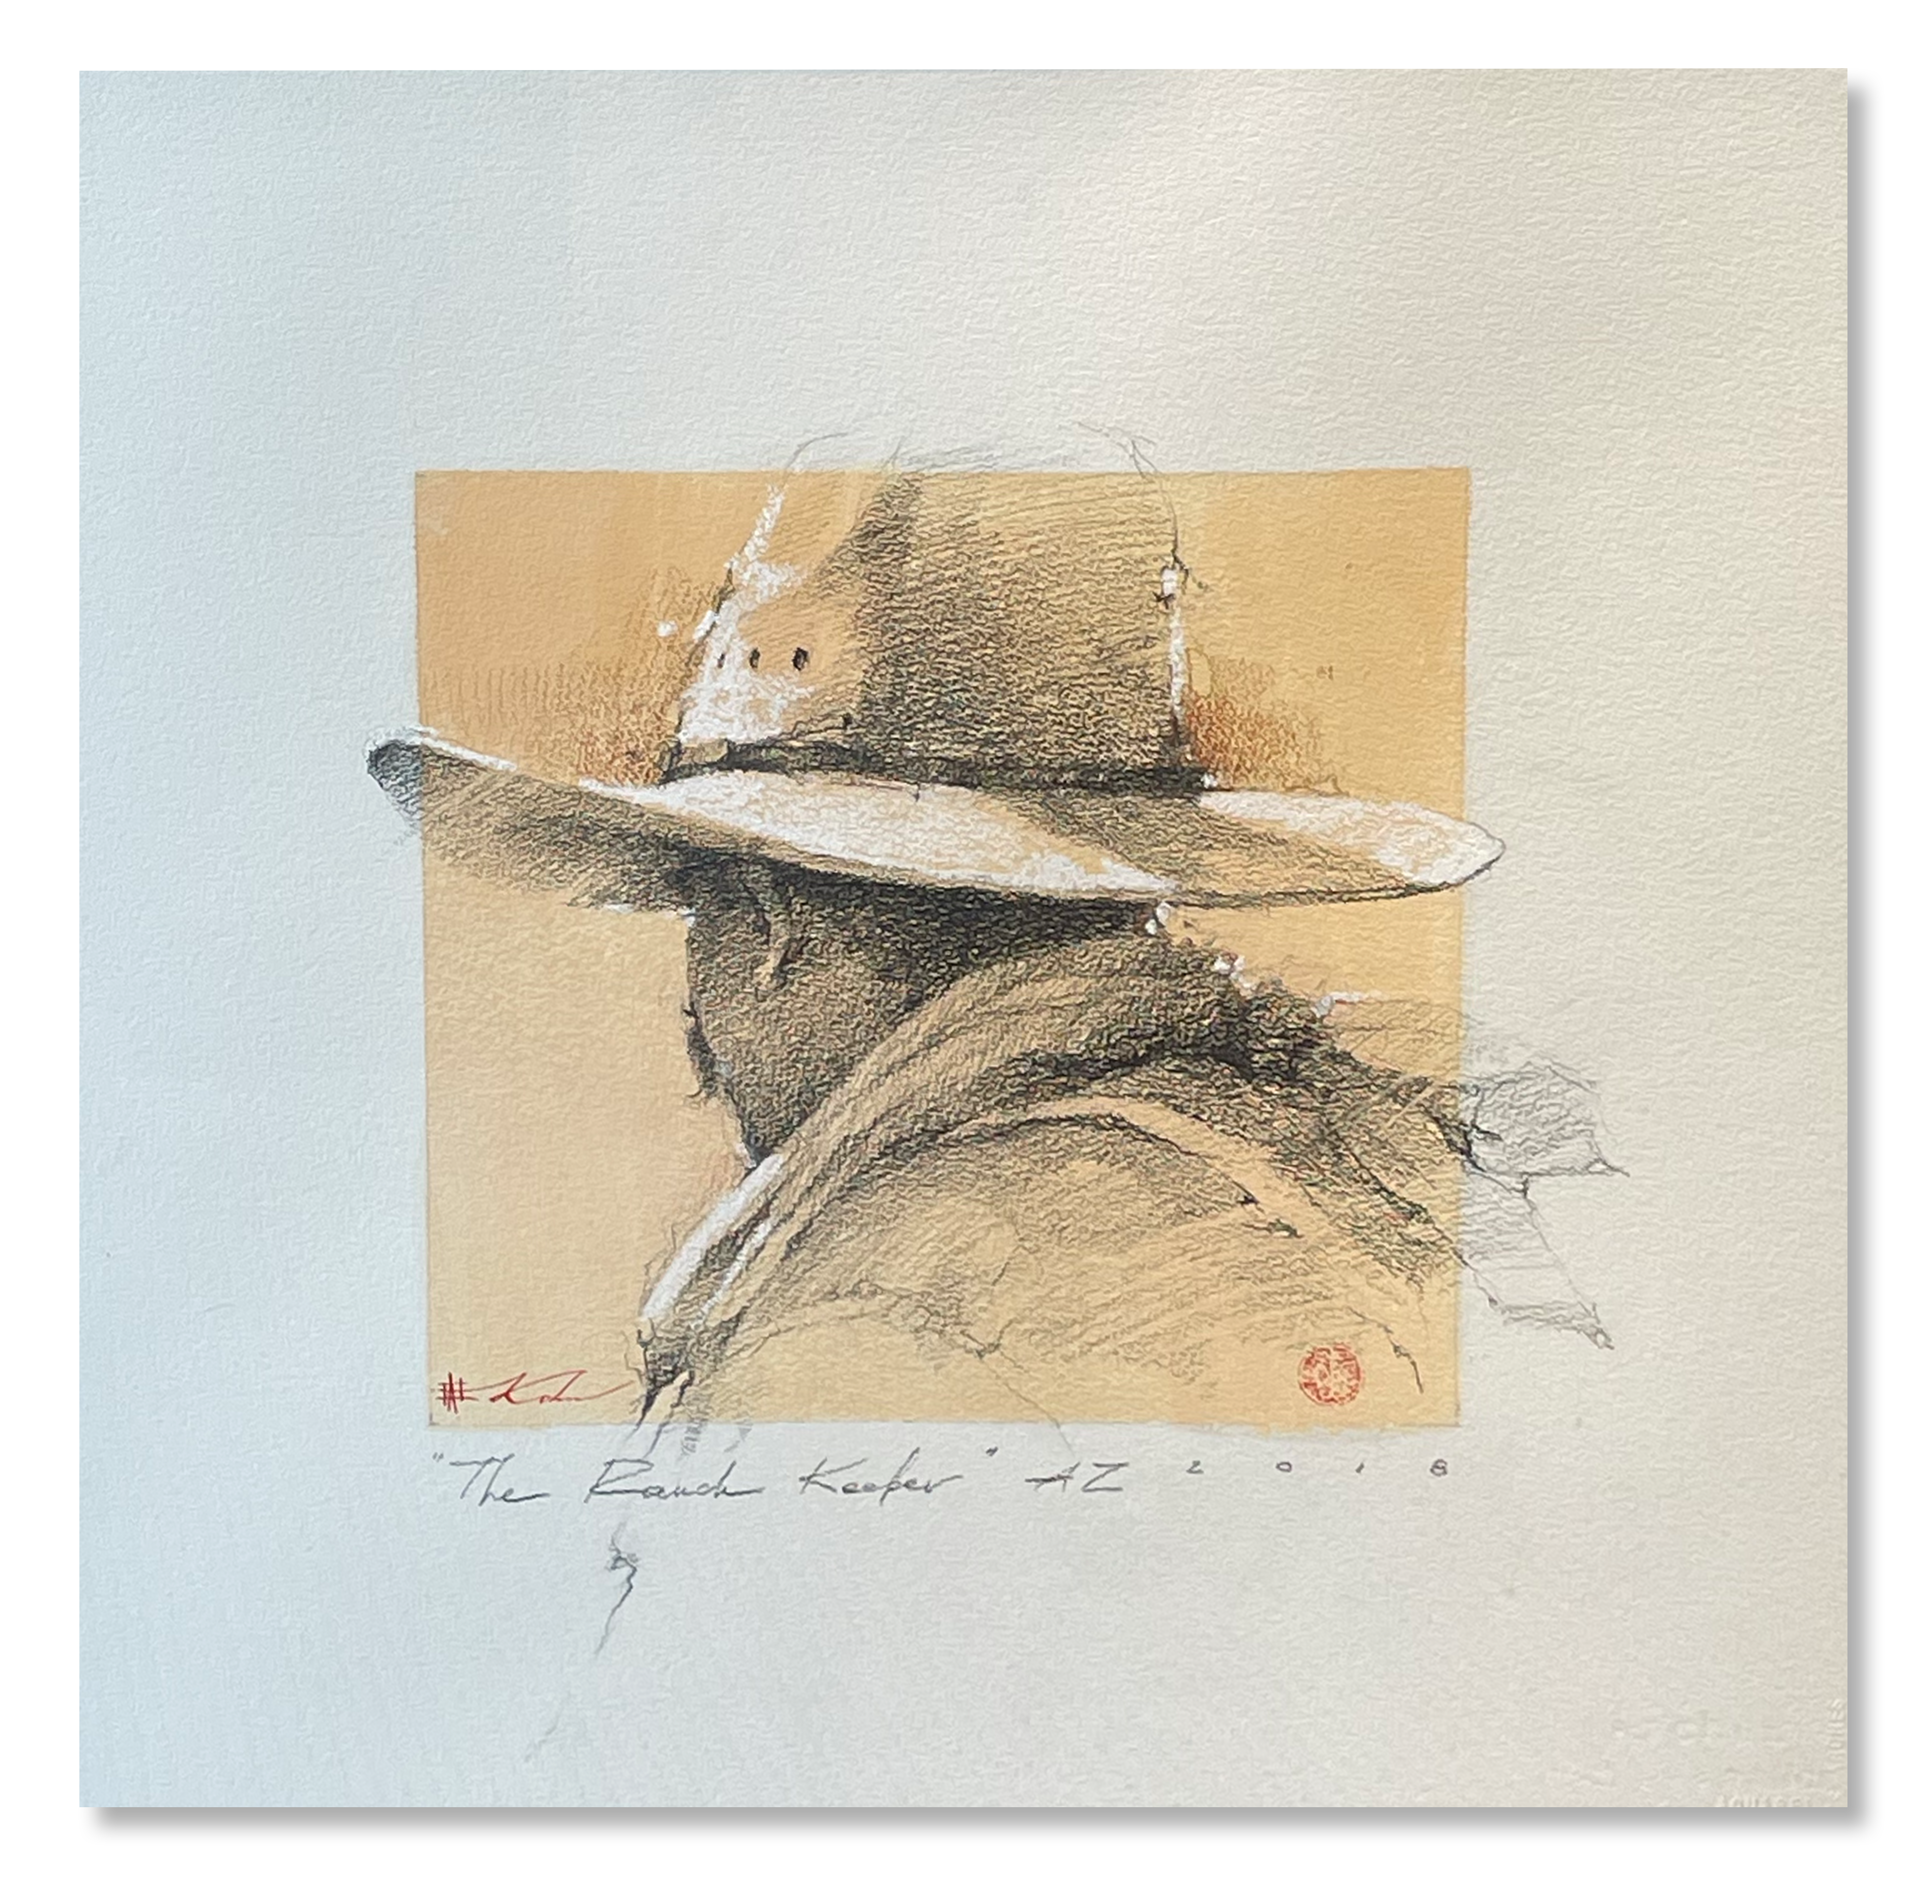 "The Ranch Keeper" by Andre Kohn